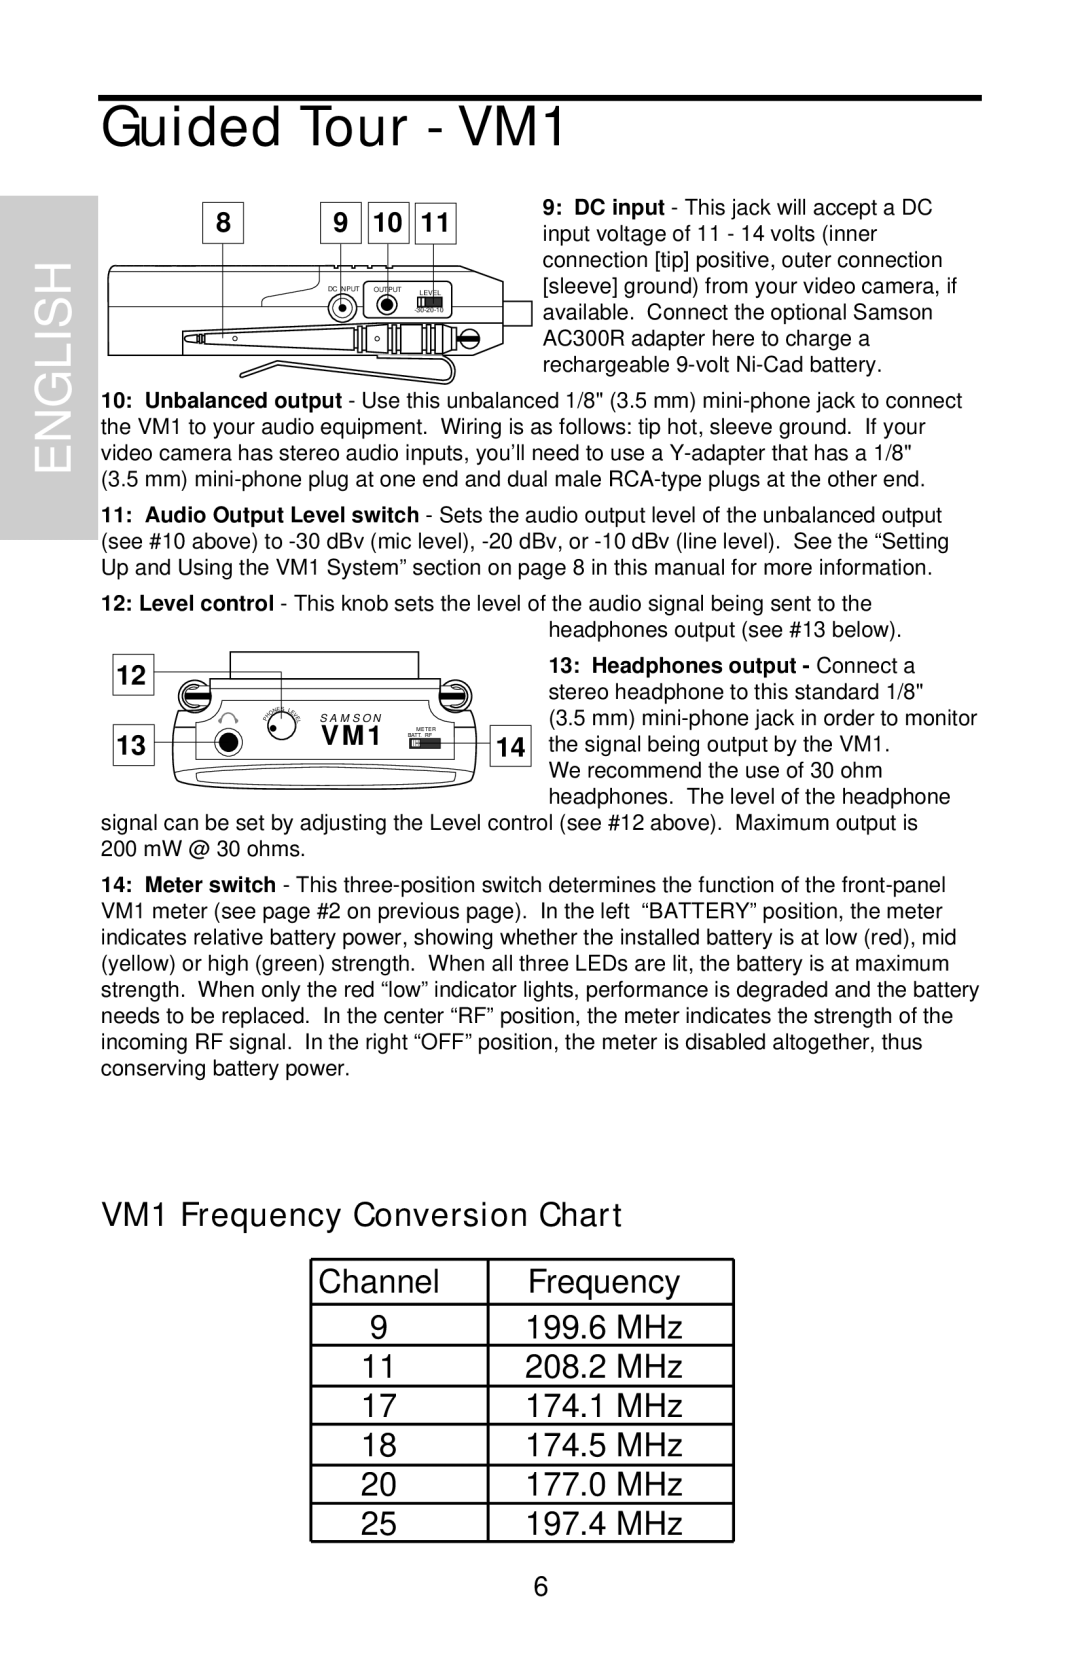 Samson VHF Micro TRUE DIVERSITY WIRELESS owner manual VM1 Frequency Conversion Chart, Guided Tour - VM1, English 